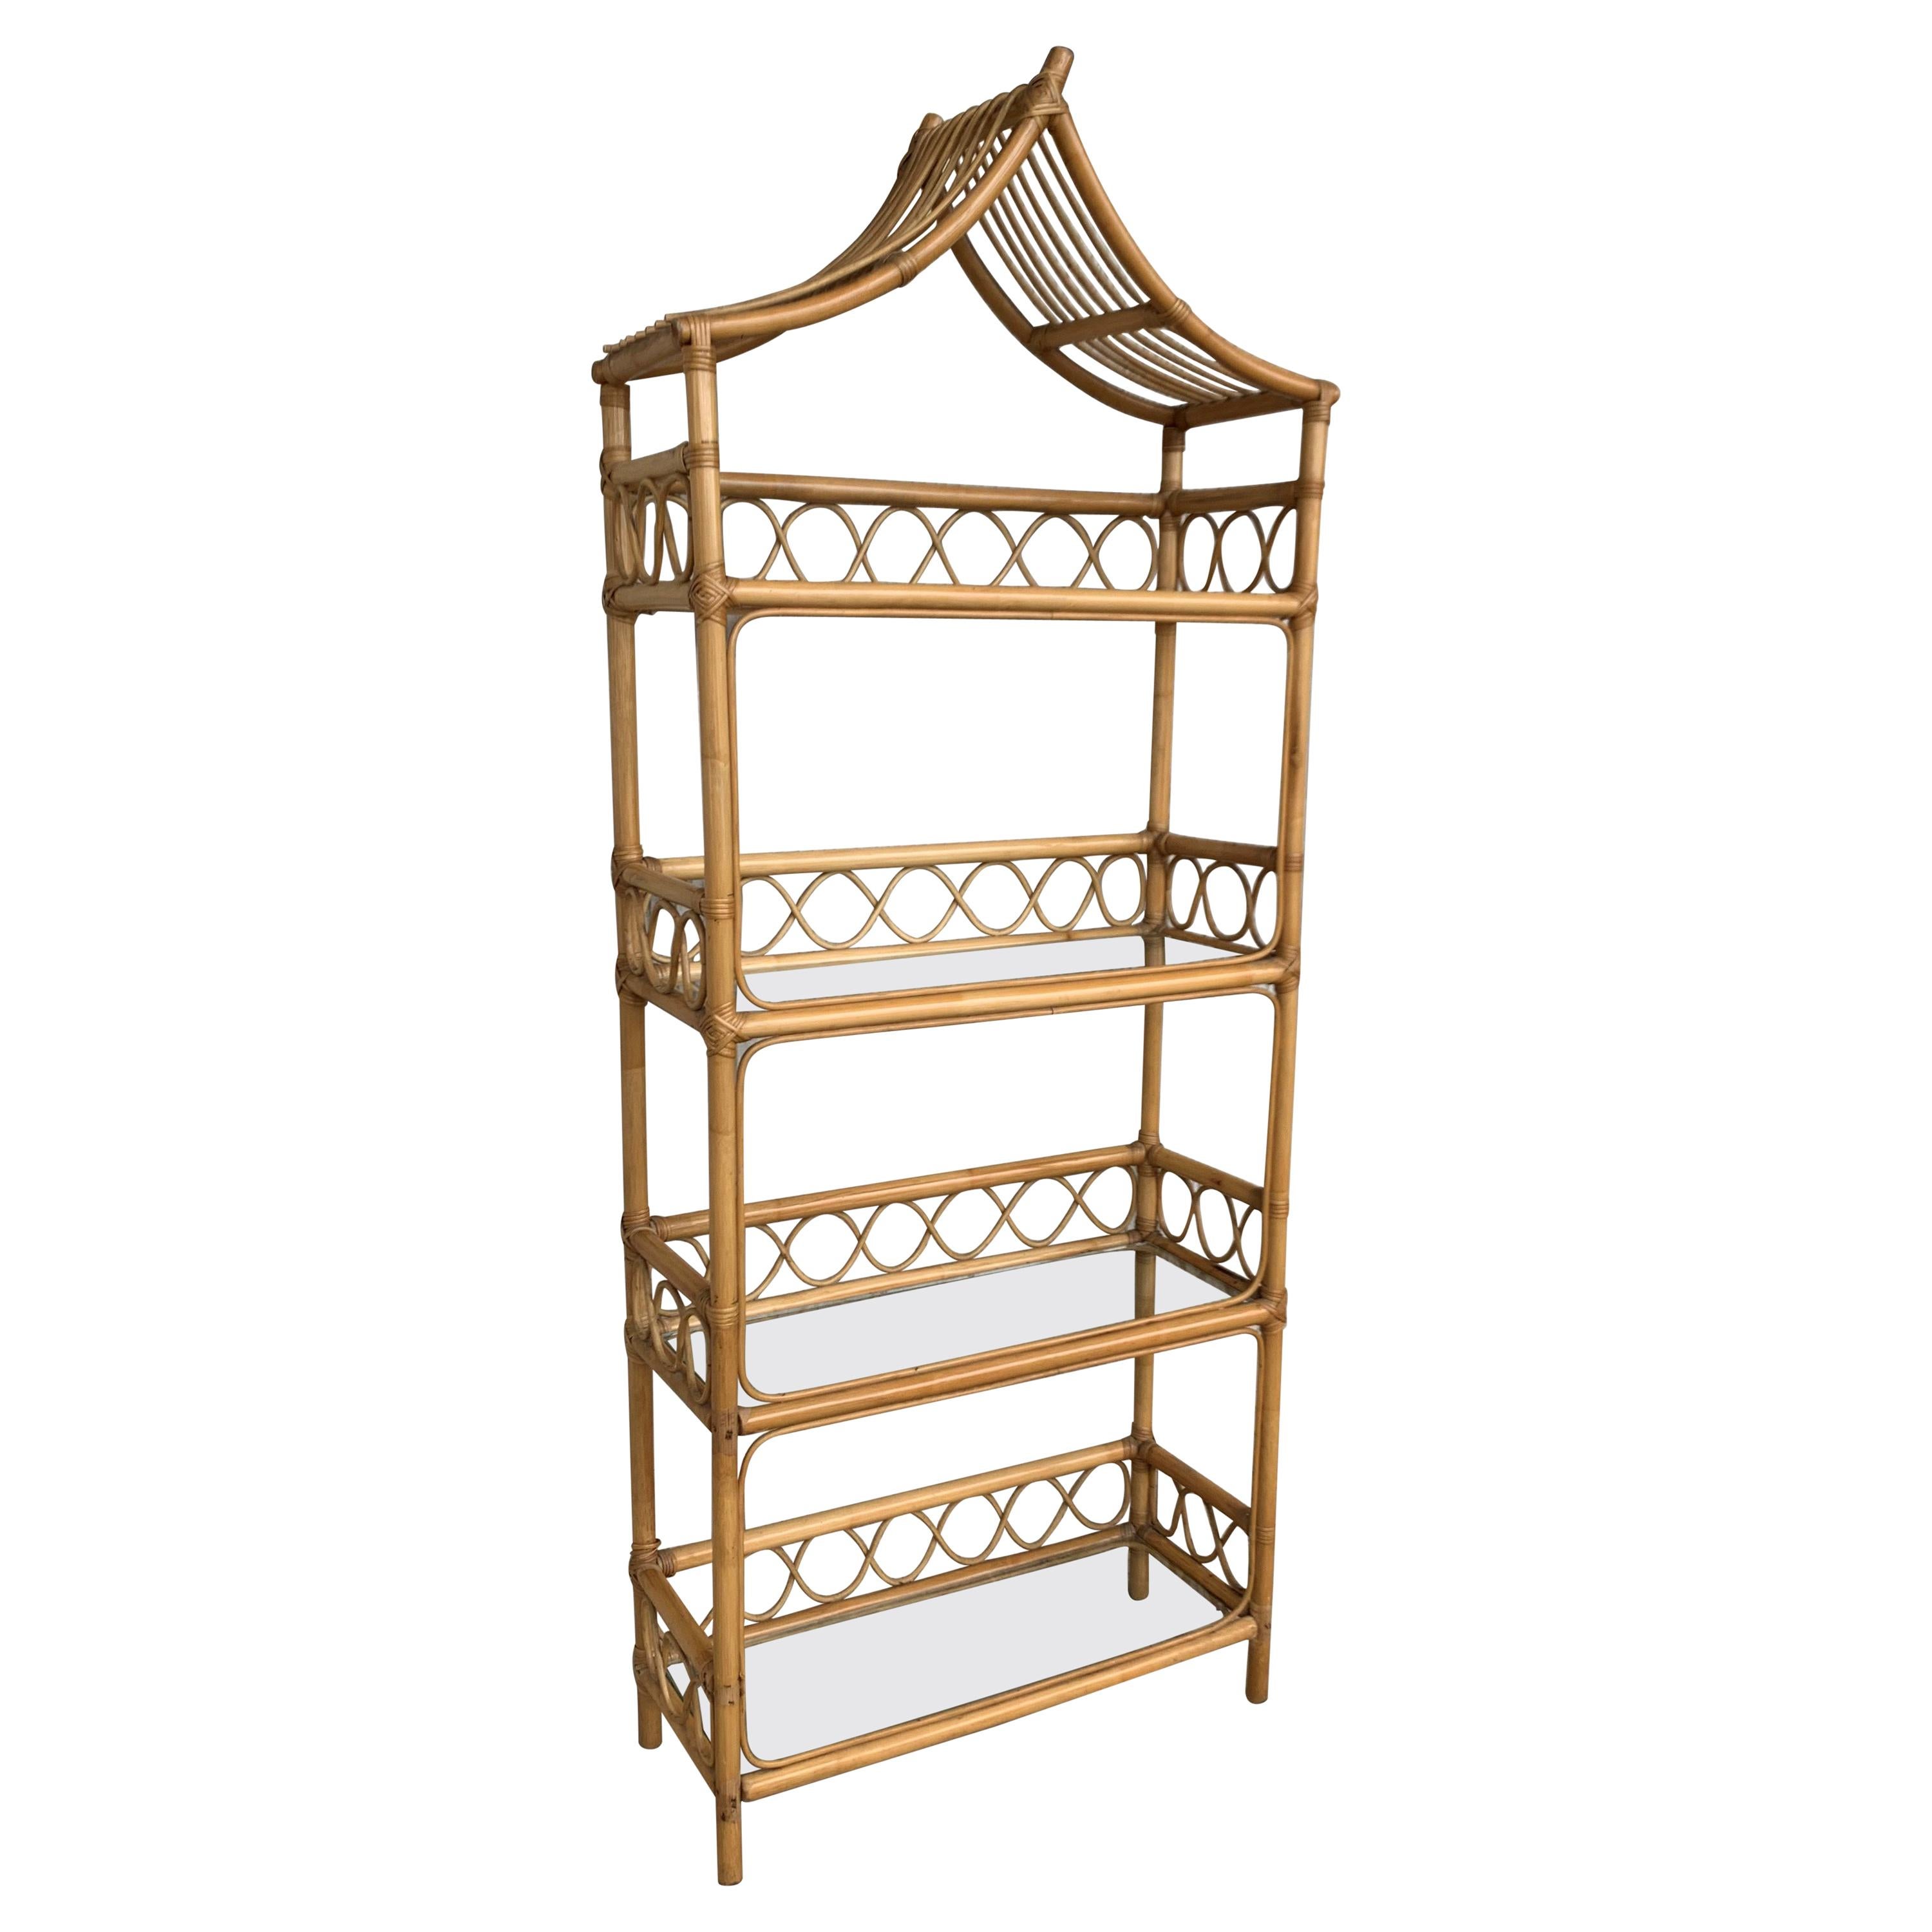 20th Century 20th Midcentury Bamboo and Glass Étagère, Pagoda Style. Four Shelves